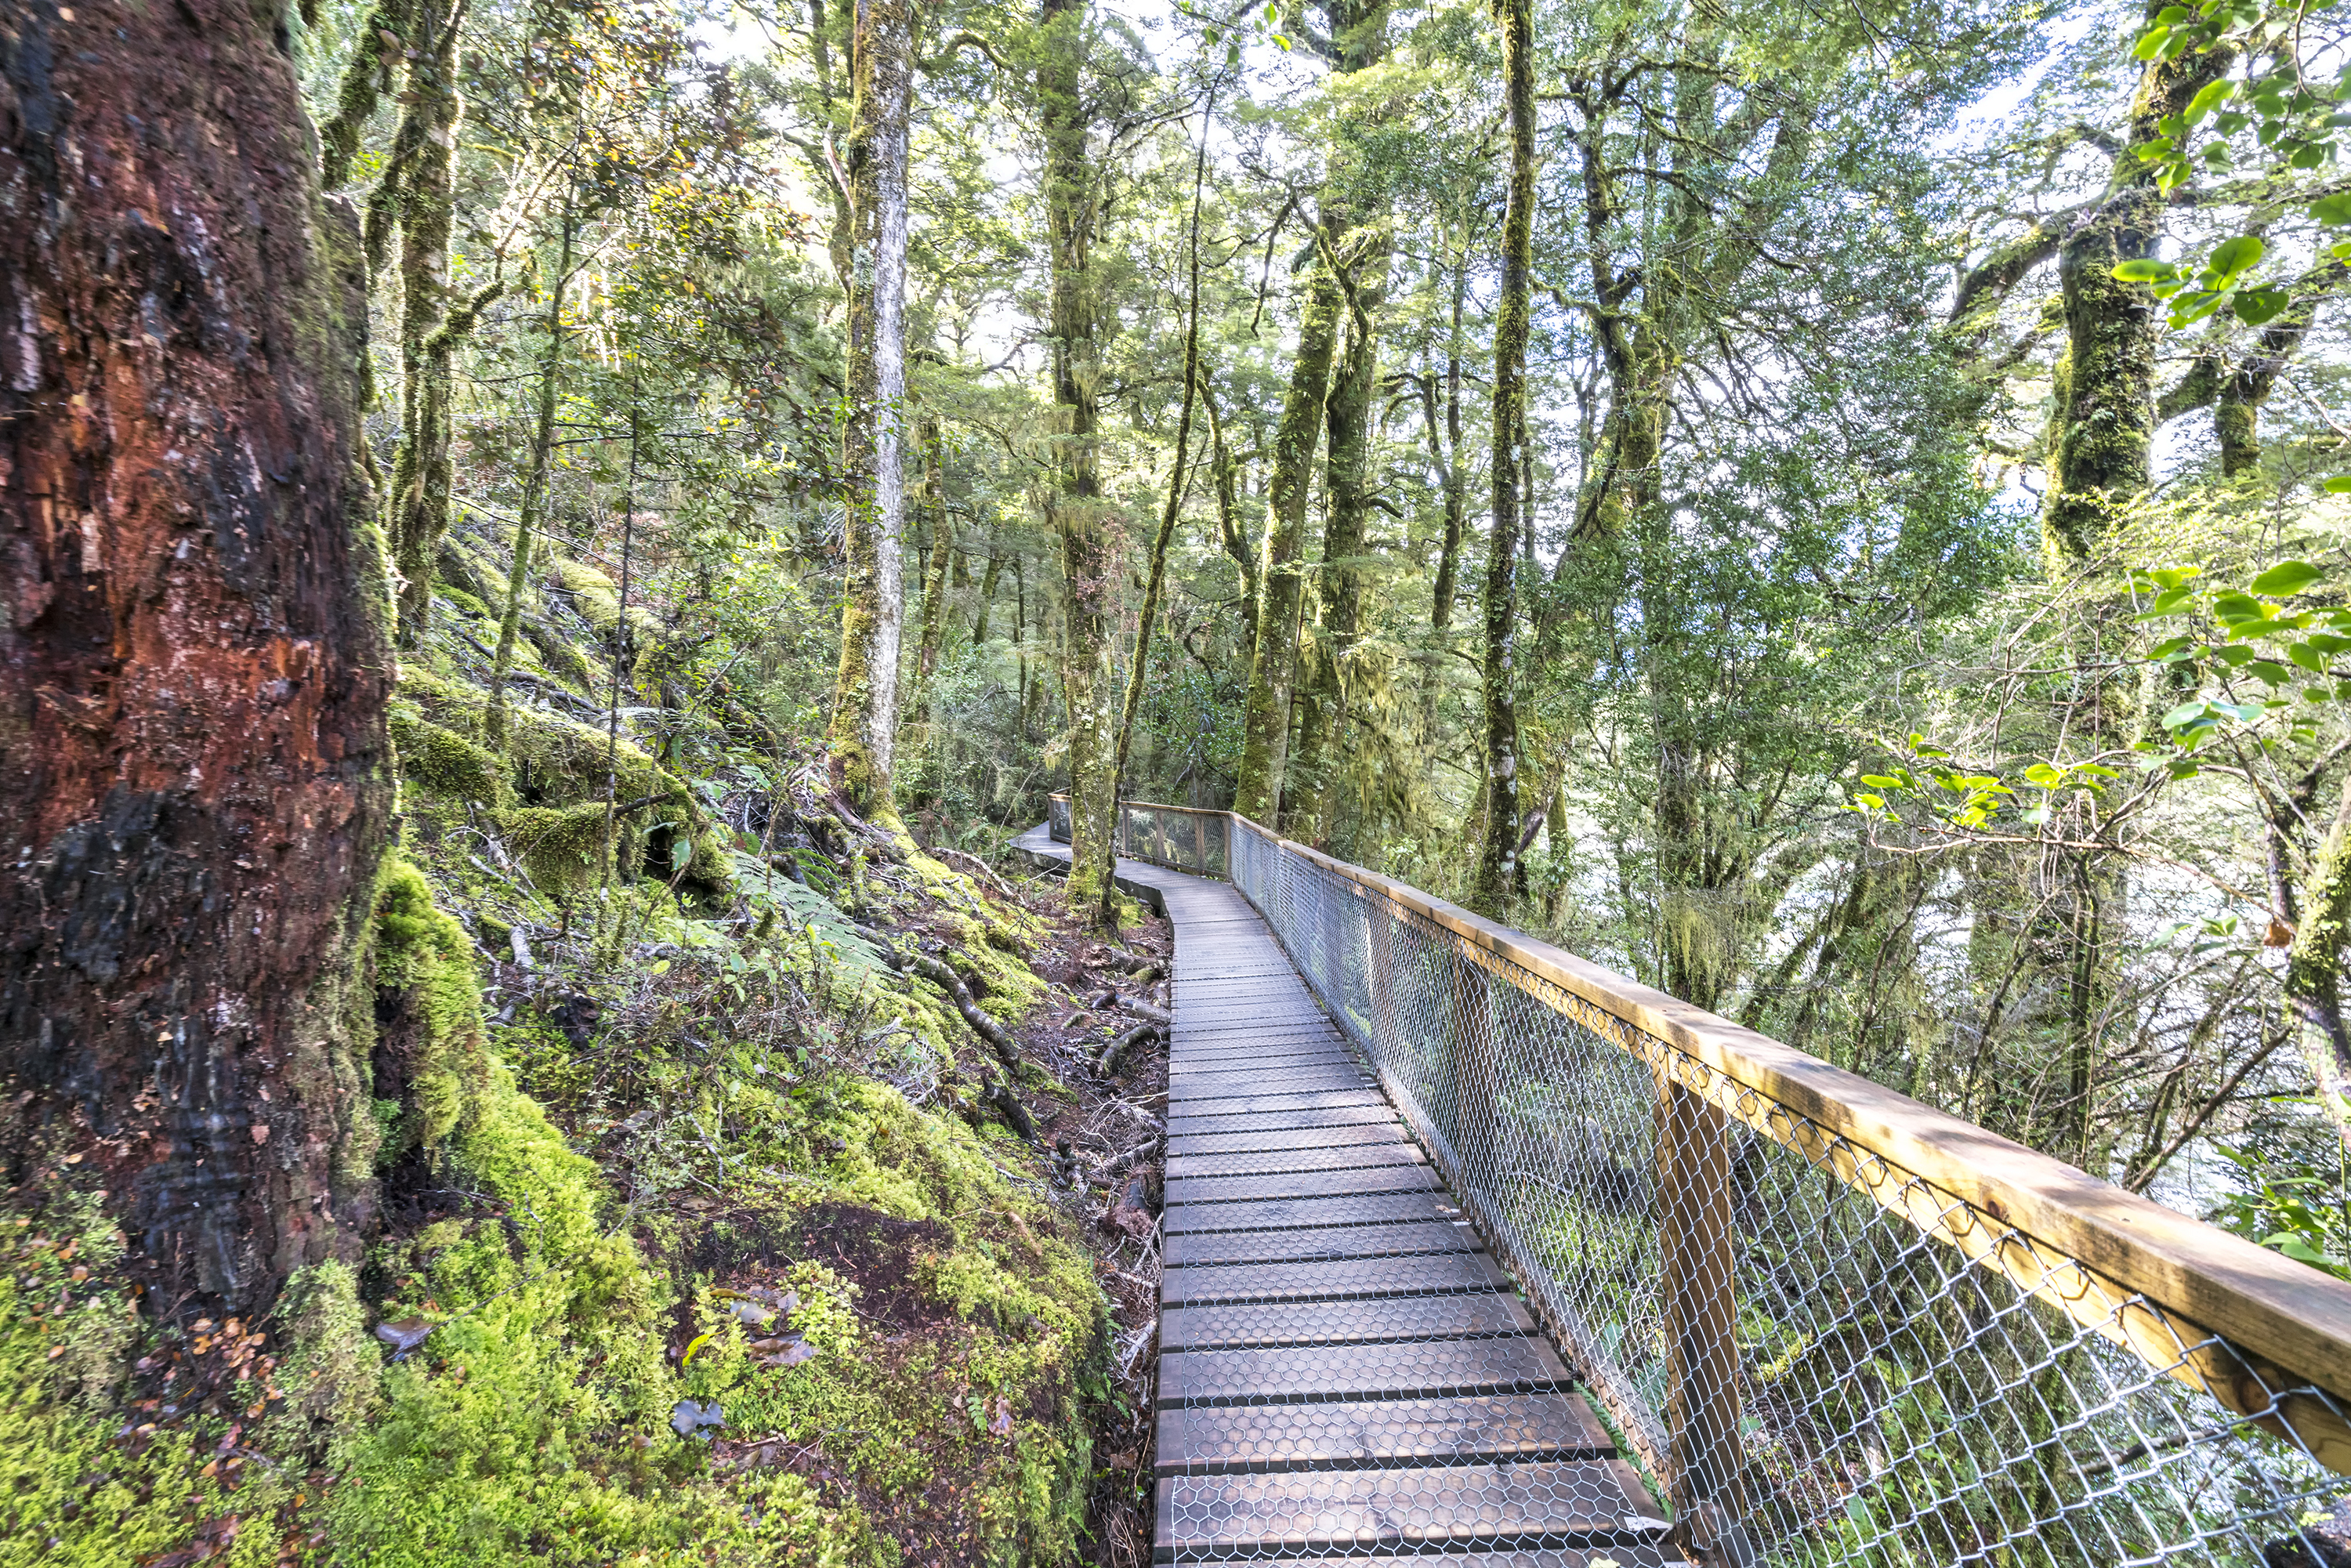 A wooden pathway through lush New Zealand forest